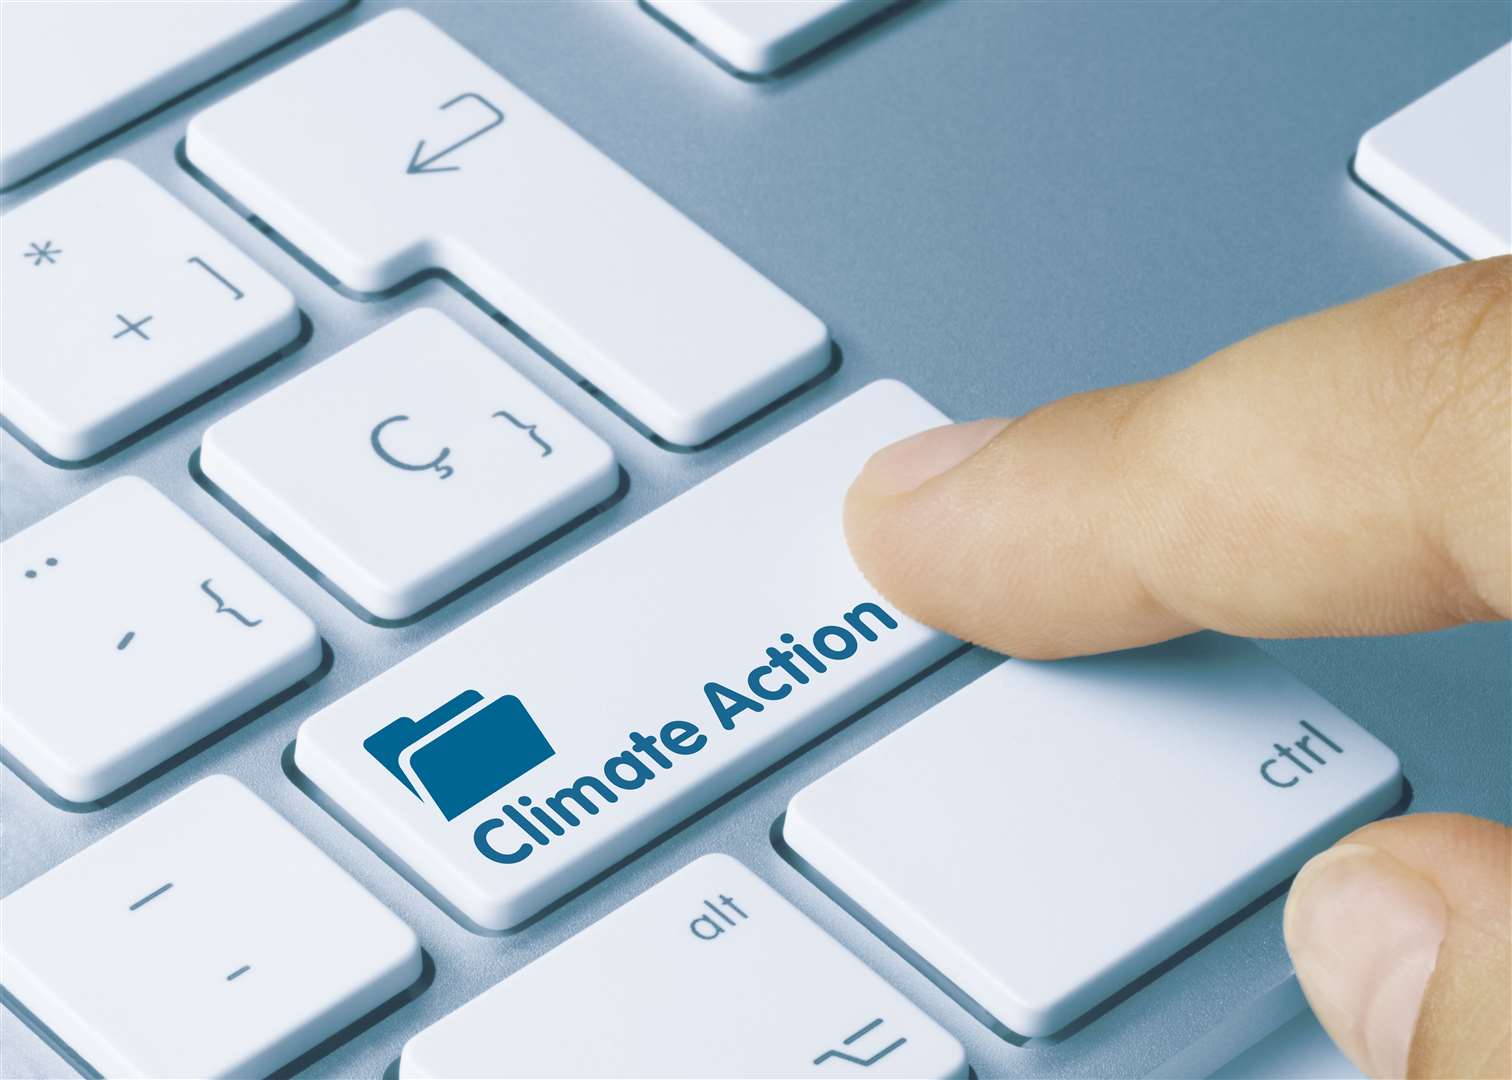 Groups in the north that are interested in climate action can sign up for an online information session.